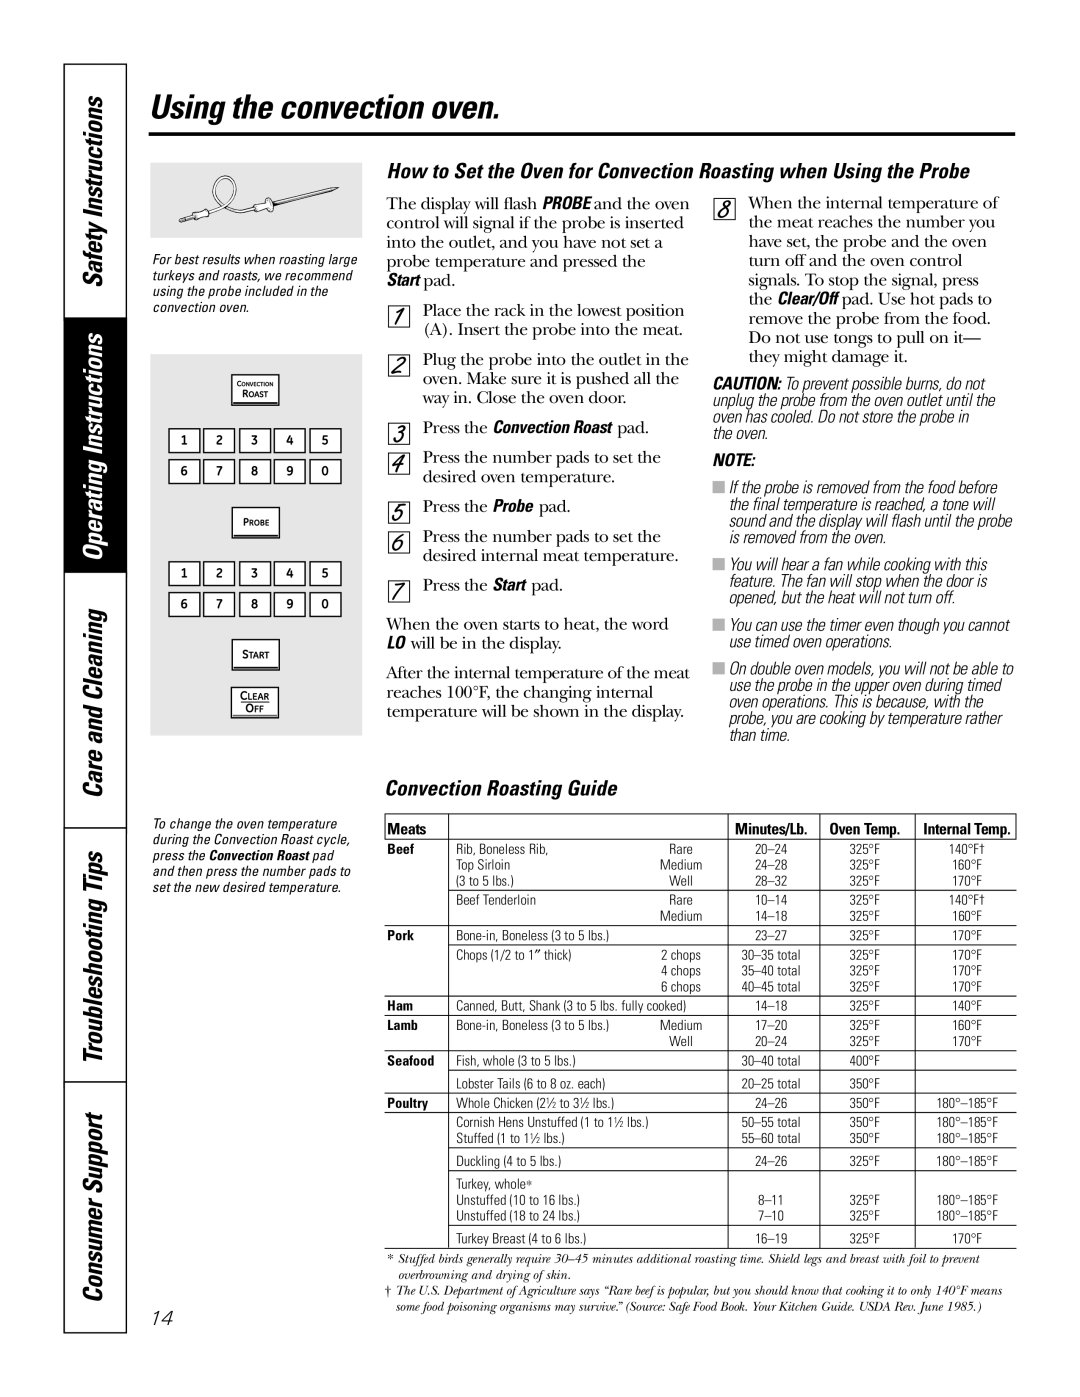 GE PK916 Using the convection oven, Instructions, Consumer Support Troubleshooting Tips, Convection Roasting Guide 